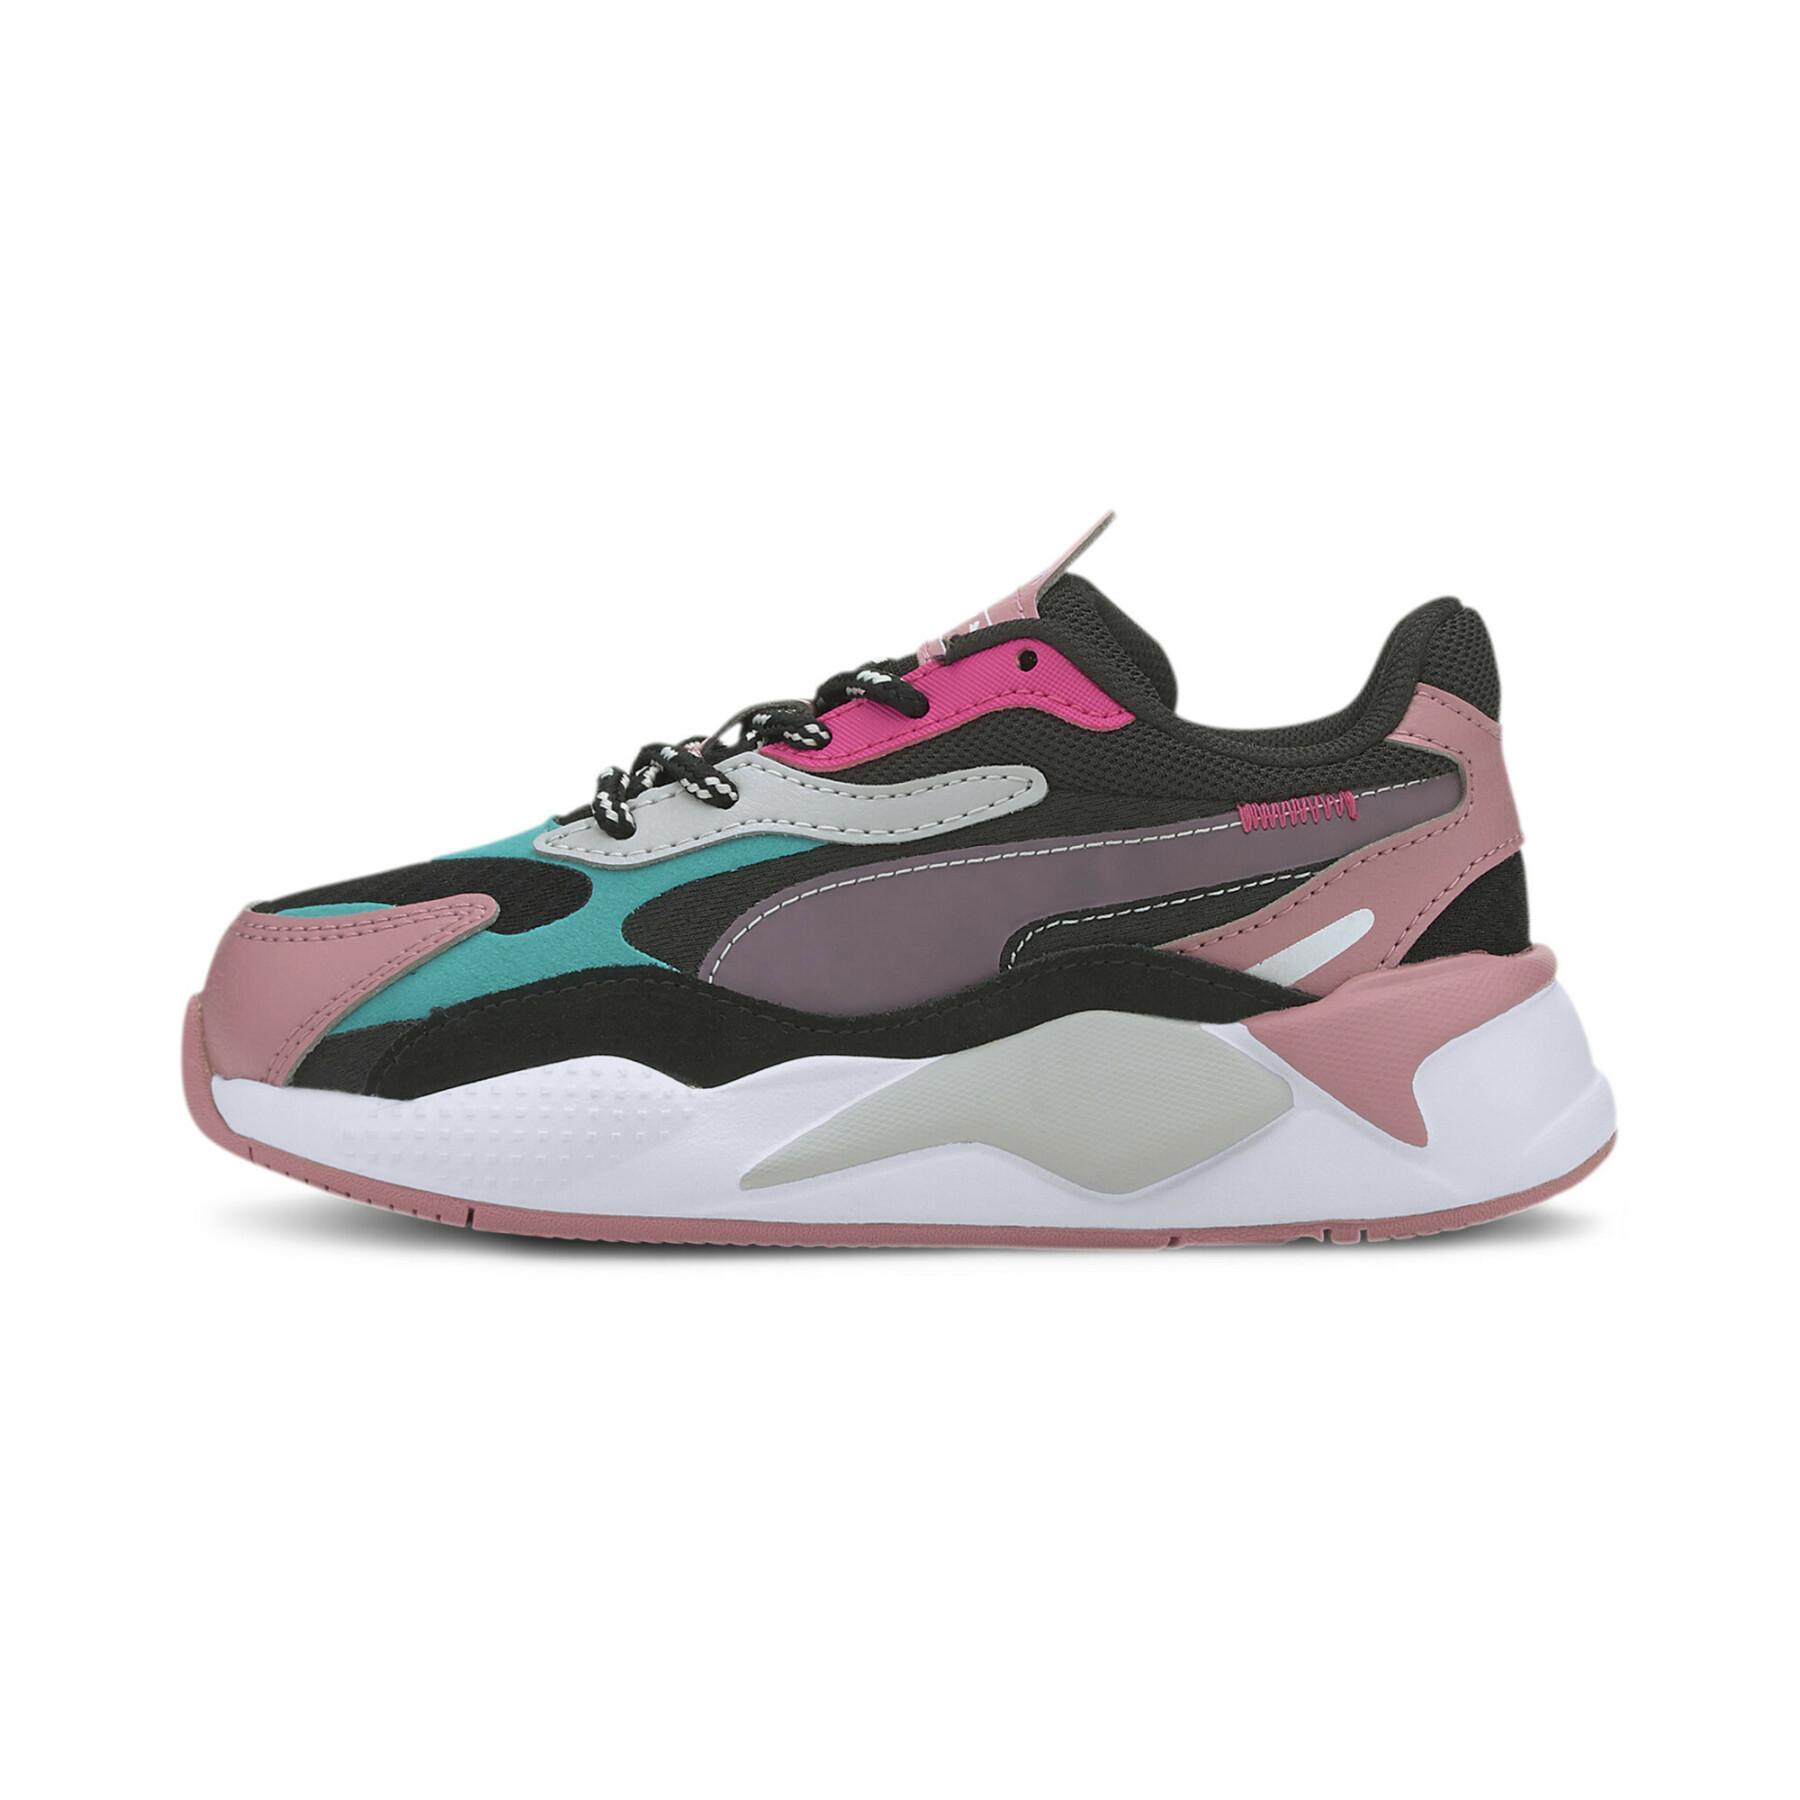 Chaussures enfant Puma RS-X³ City Attack PS